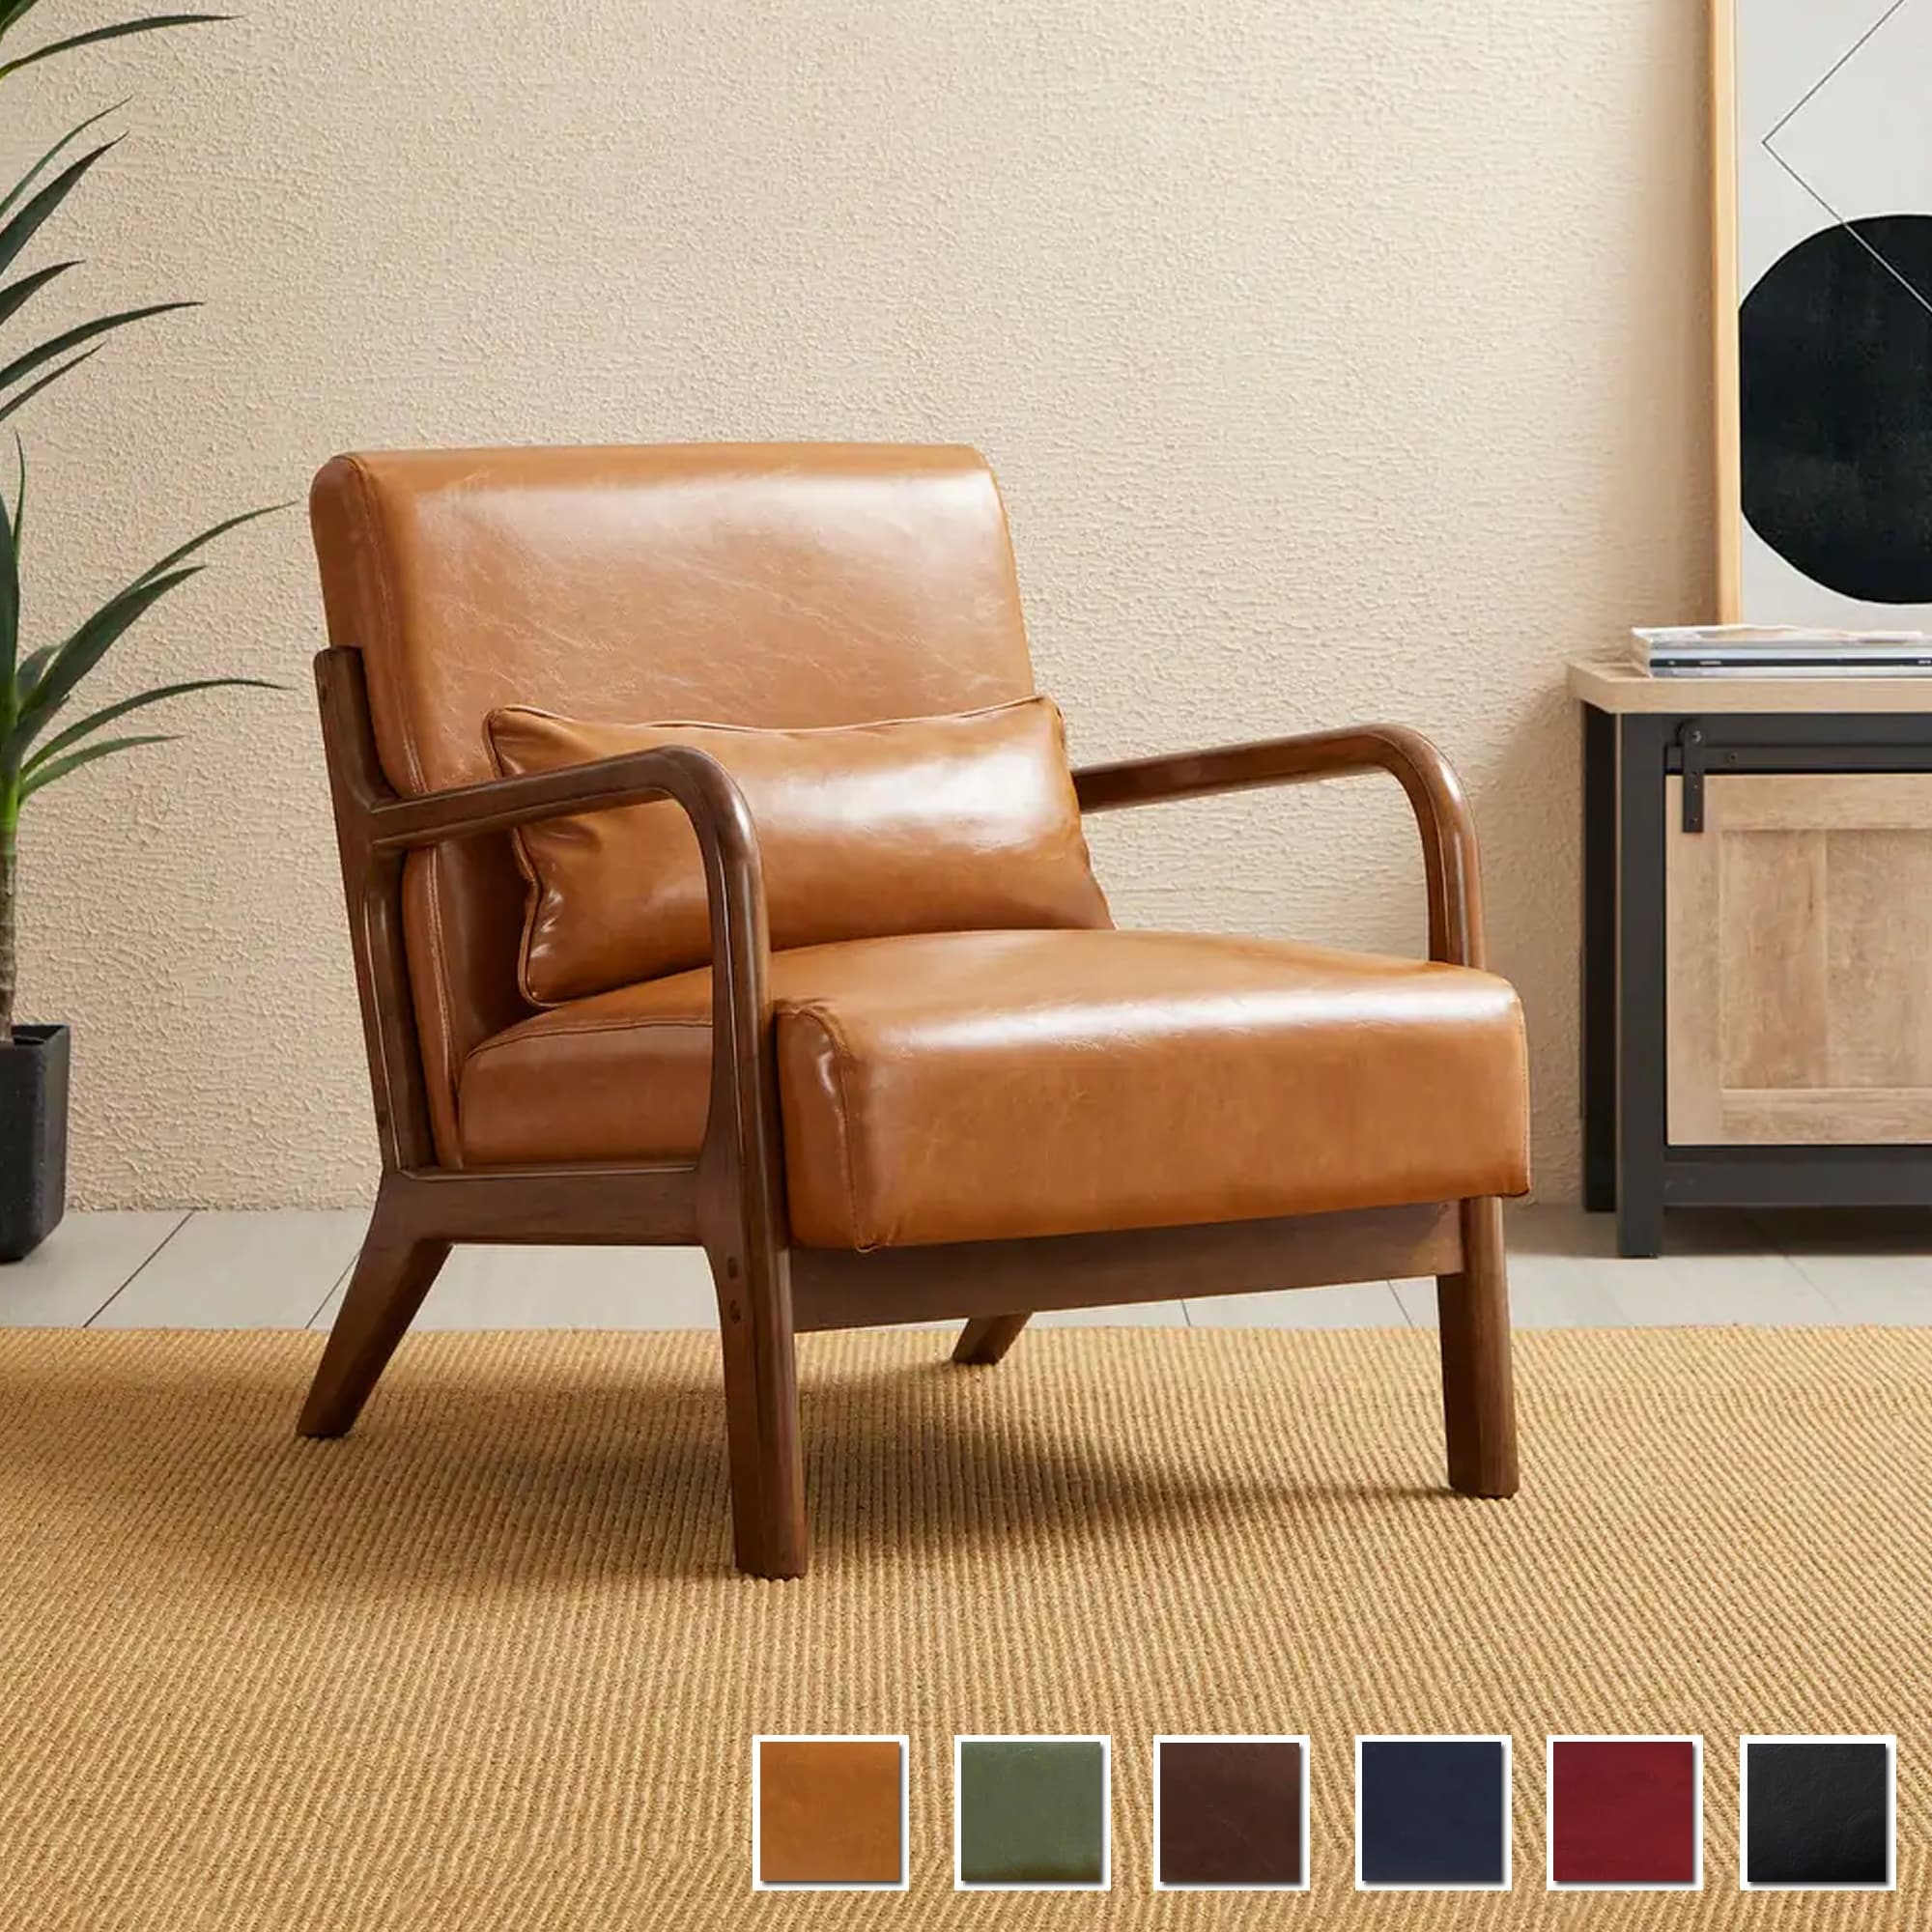 Glitzhome 30.75"H Mid-Century Modern PU Leather Armchair Accent Chair with Pillow